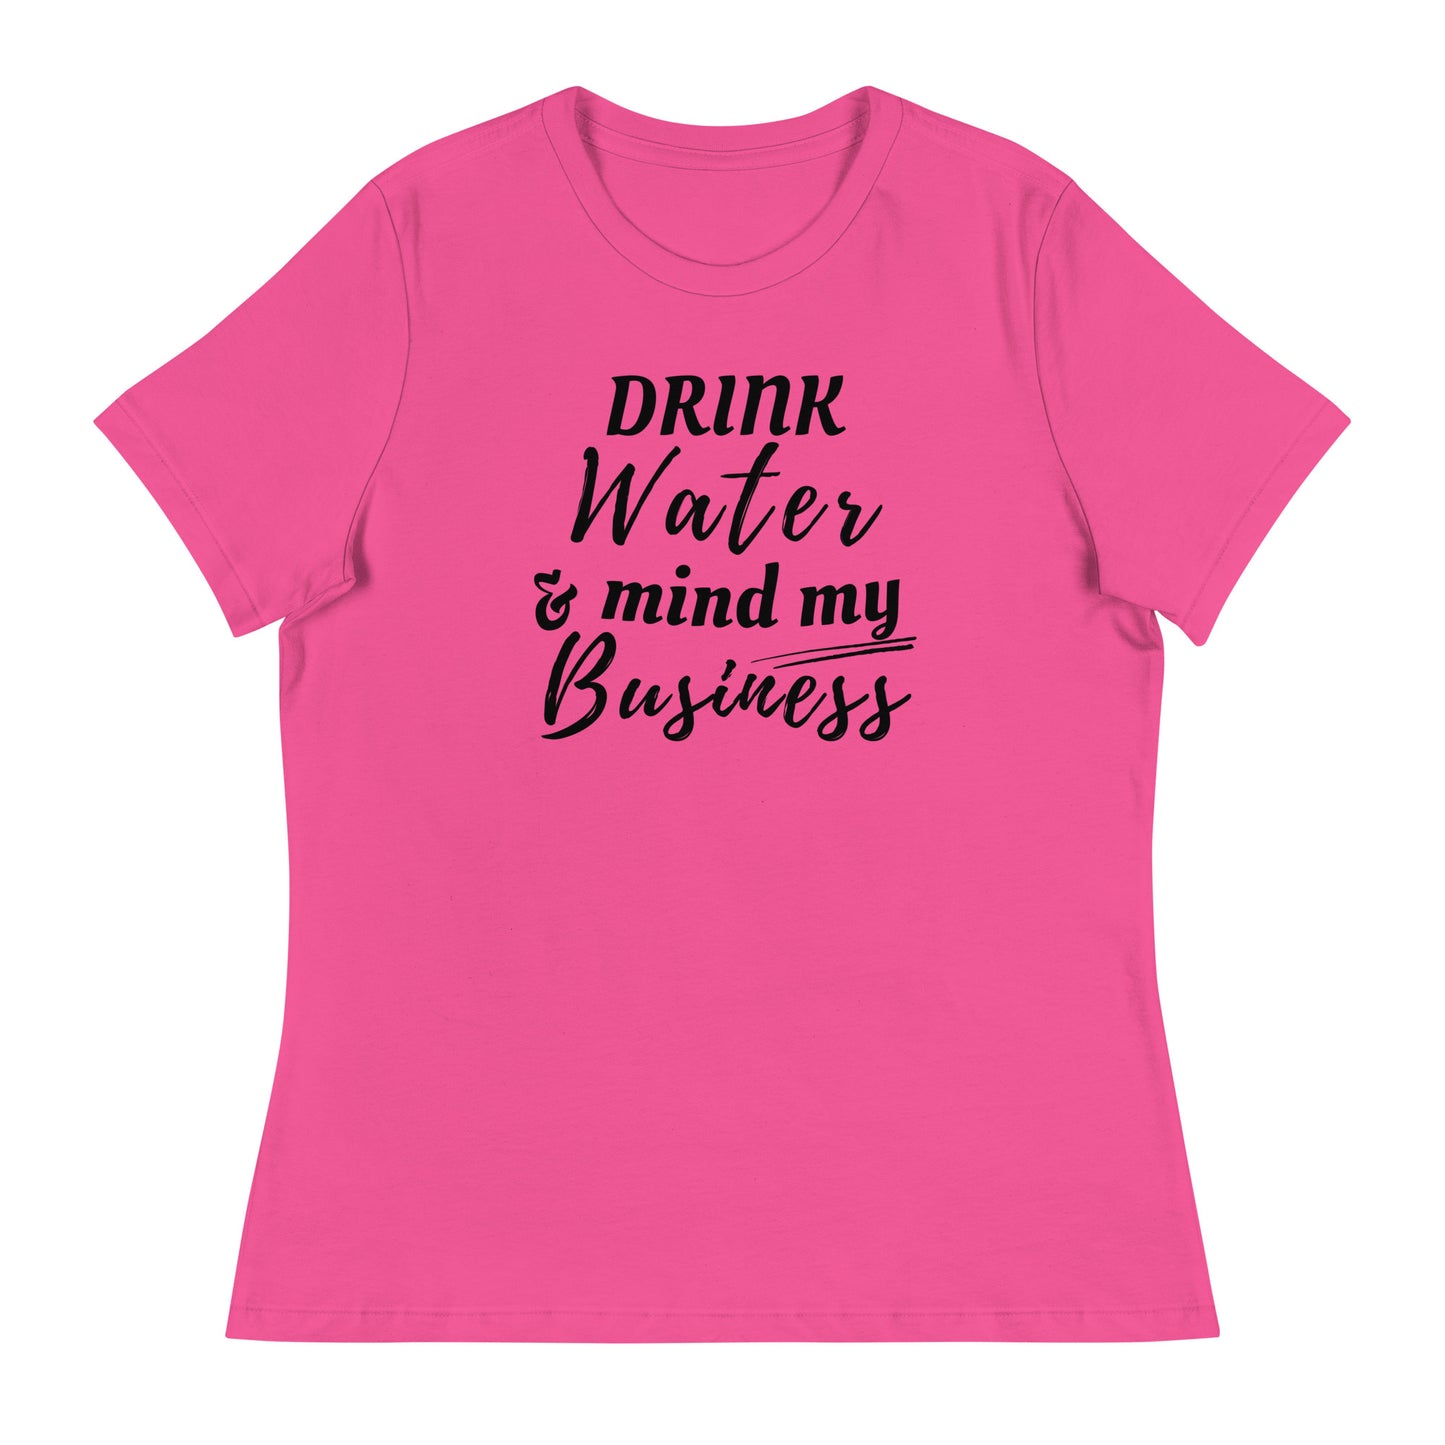 “Drink Water and Mind my Business” Women's T-Shirt